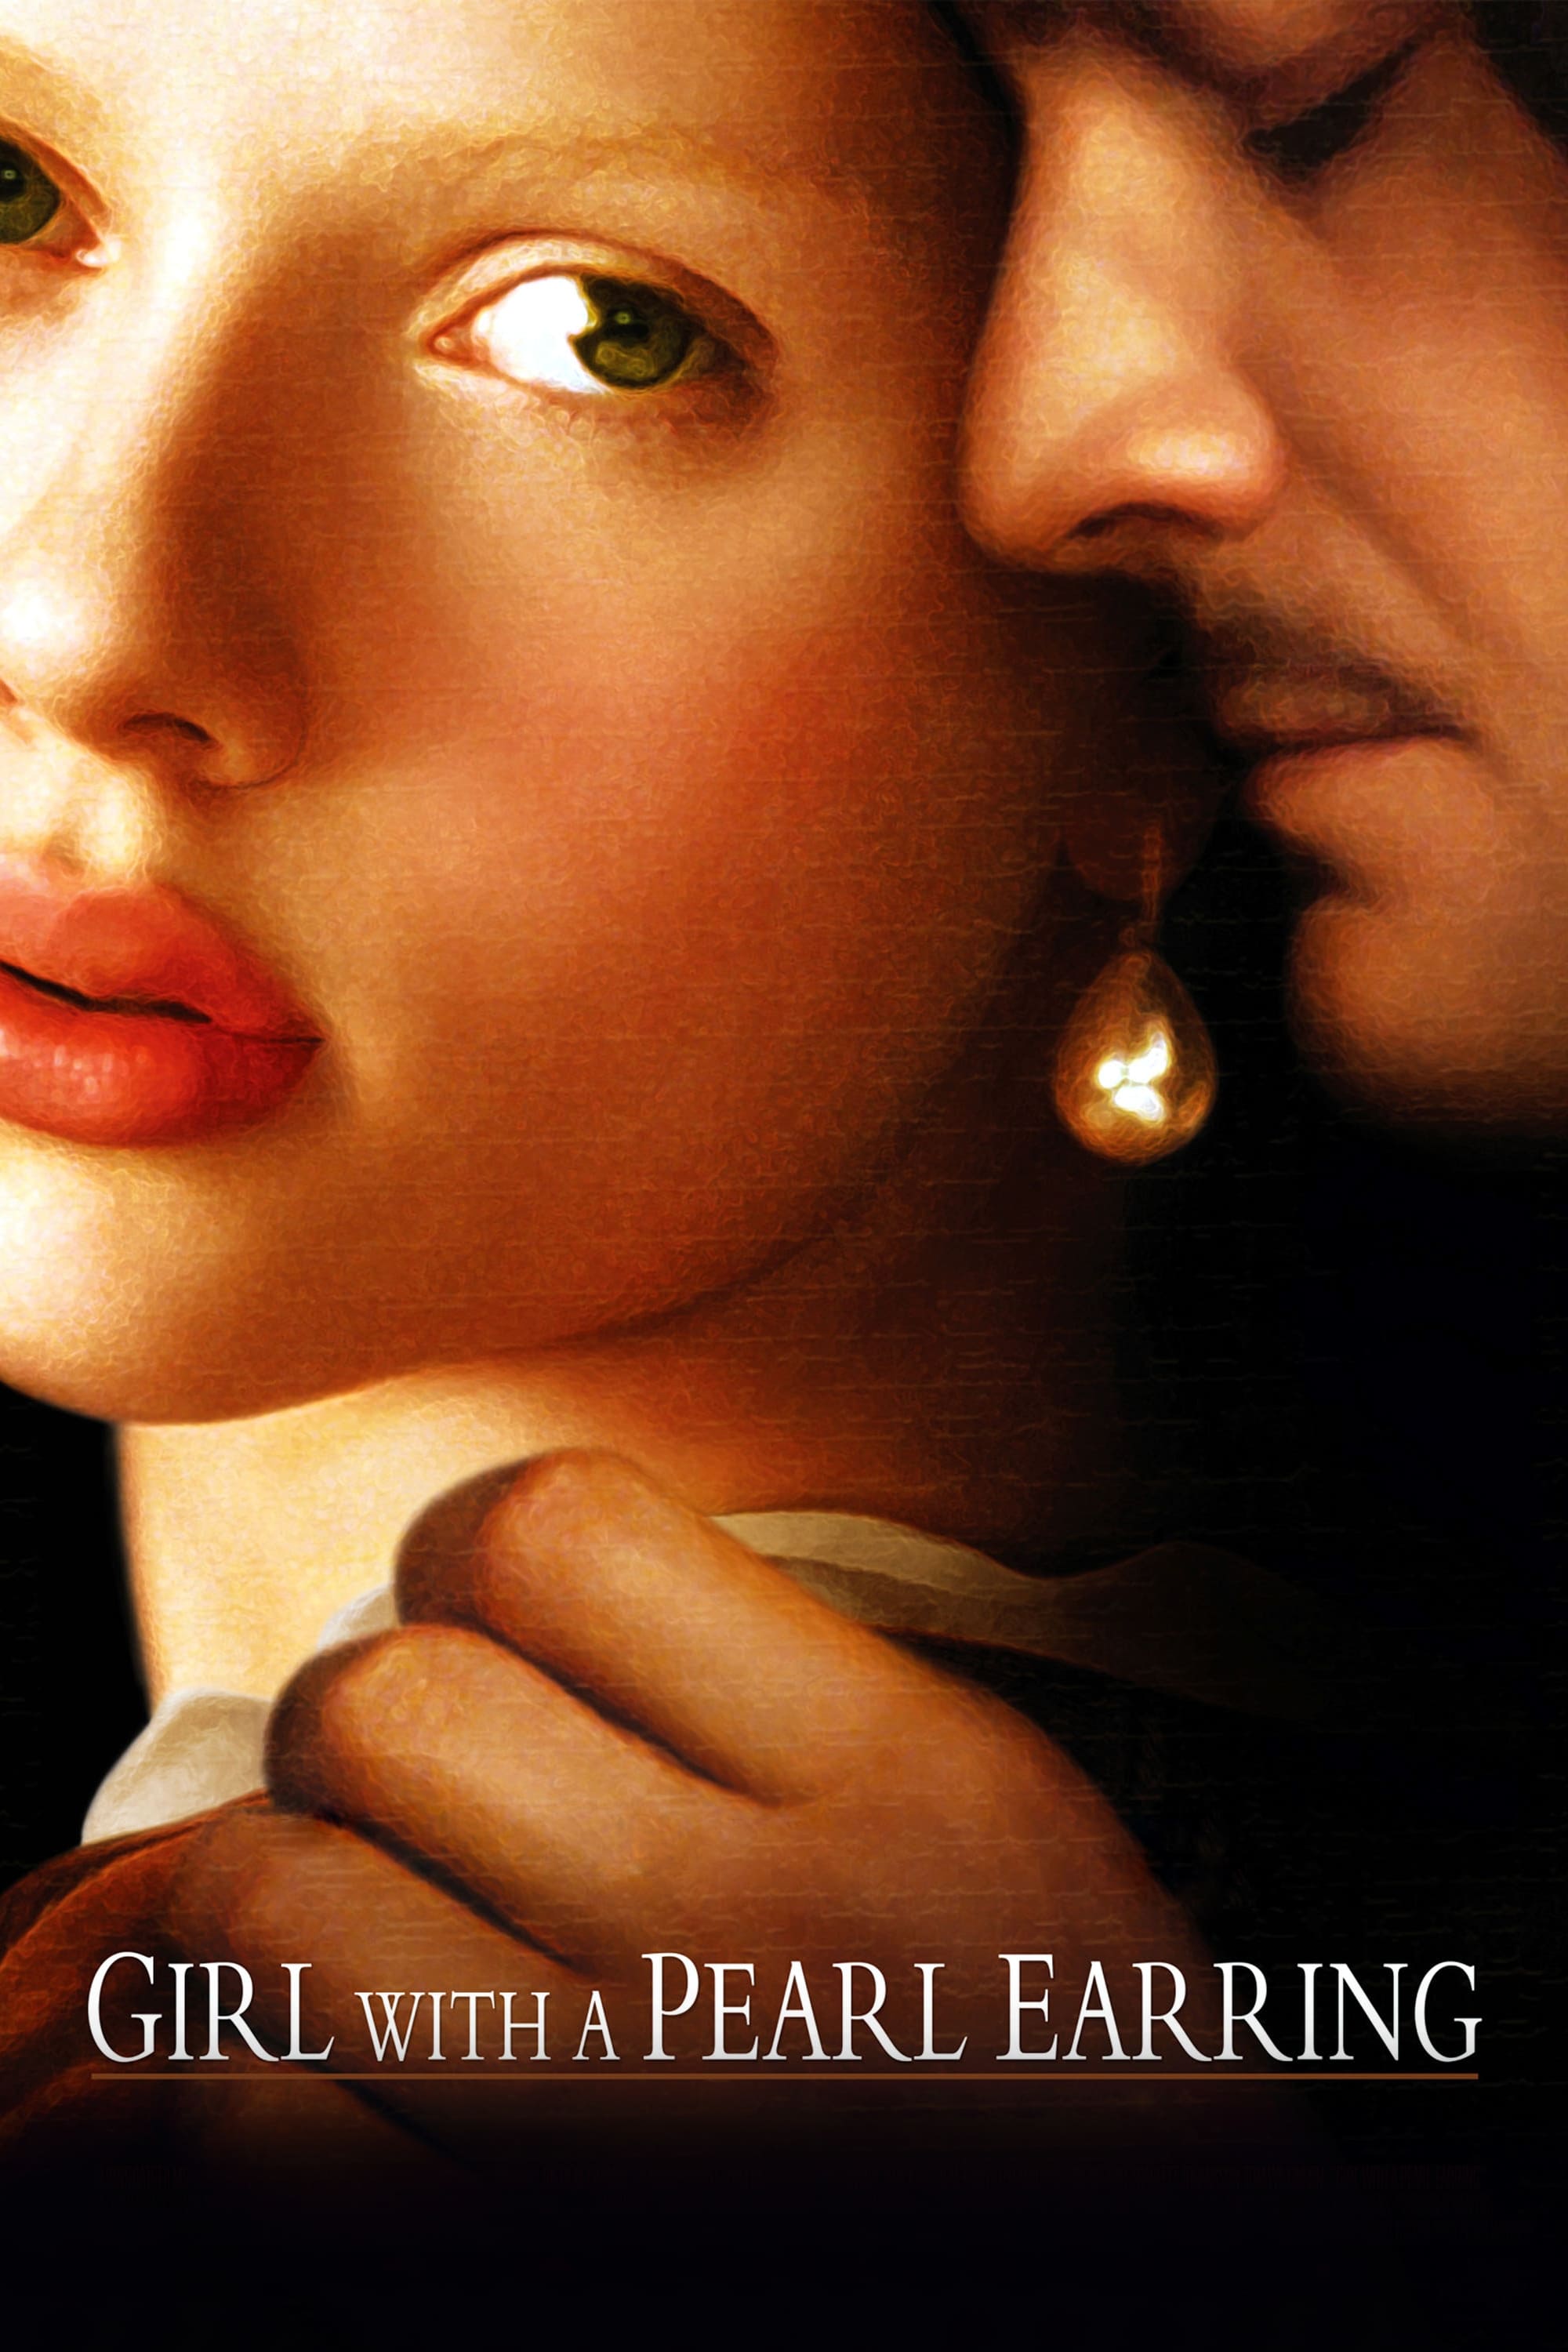 Girl with a Pearl Earring - Girl with a Pearl Earring (2003)